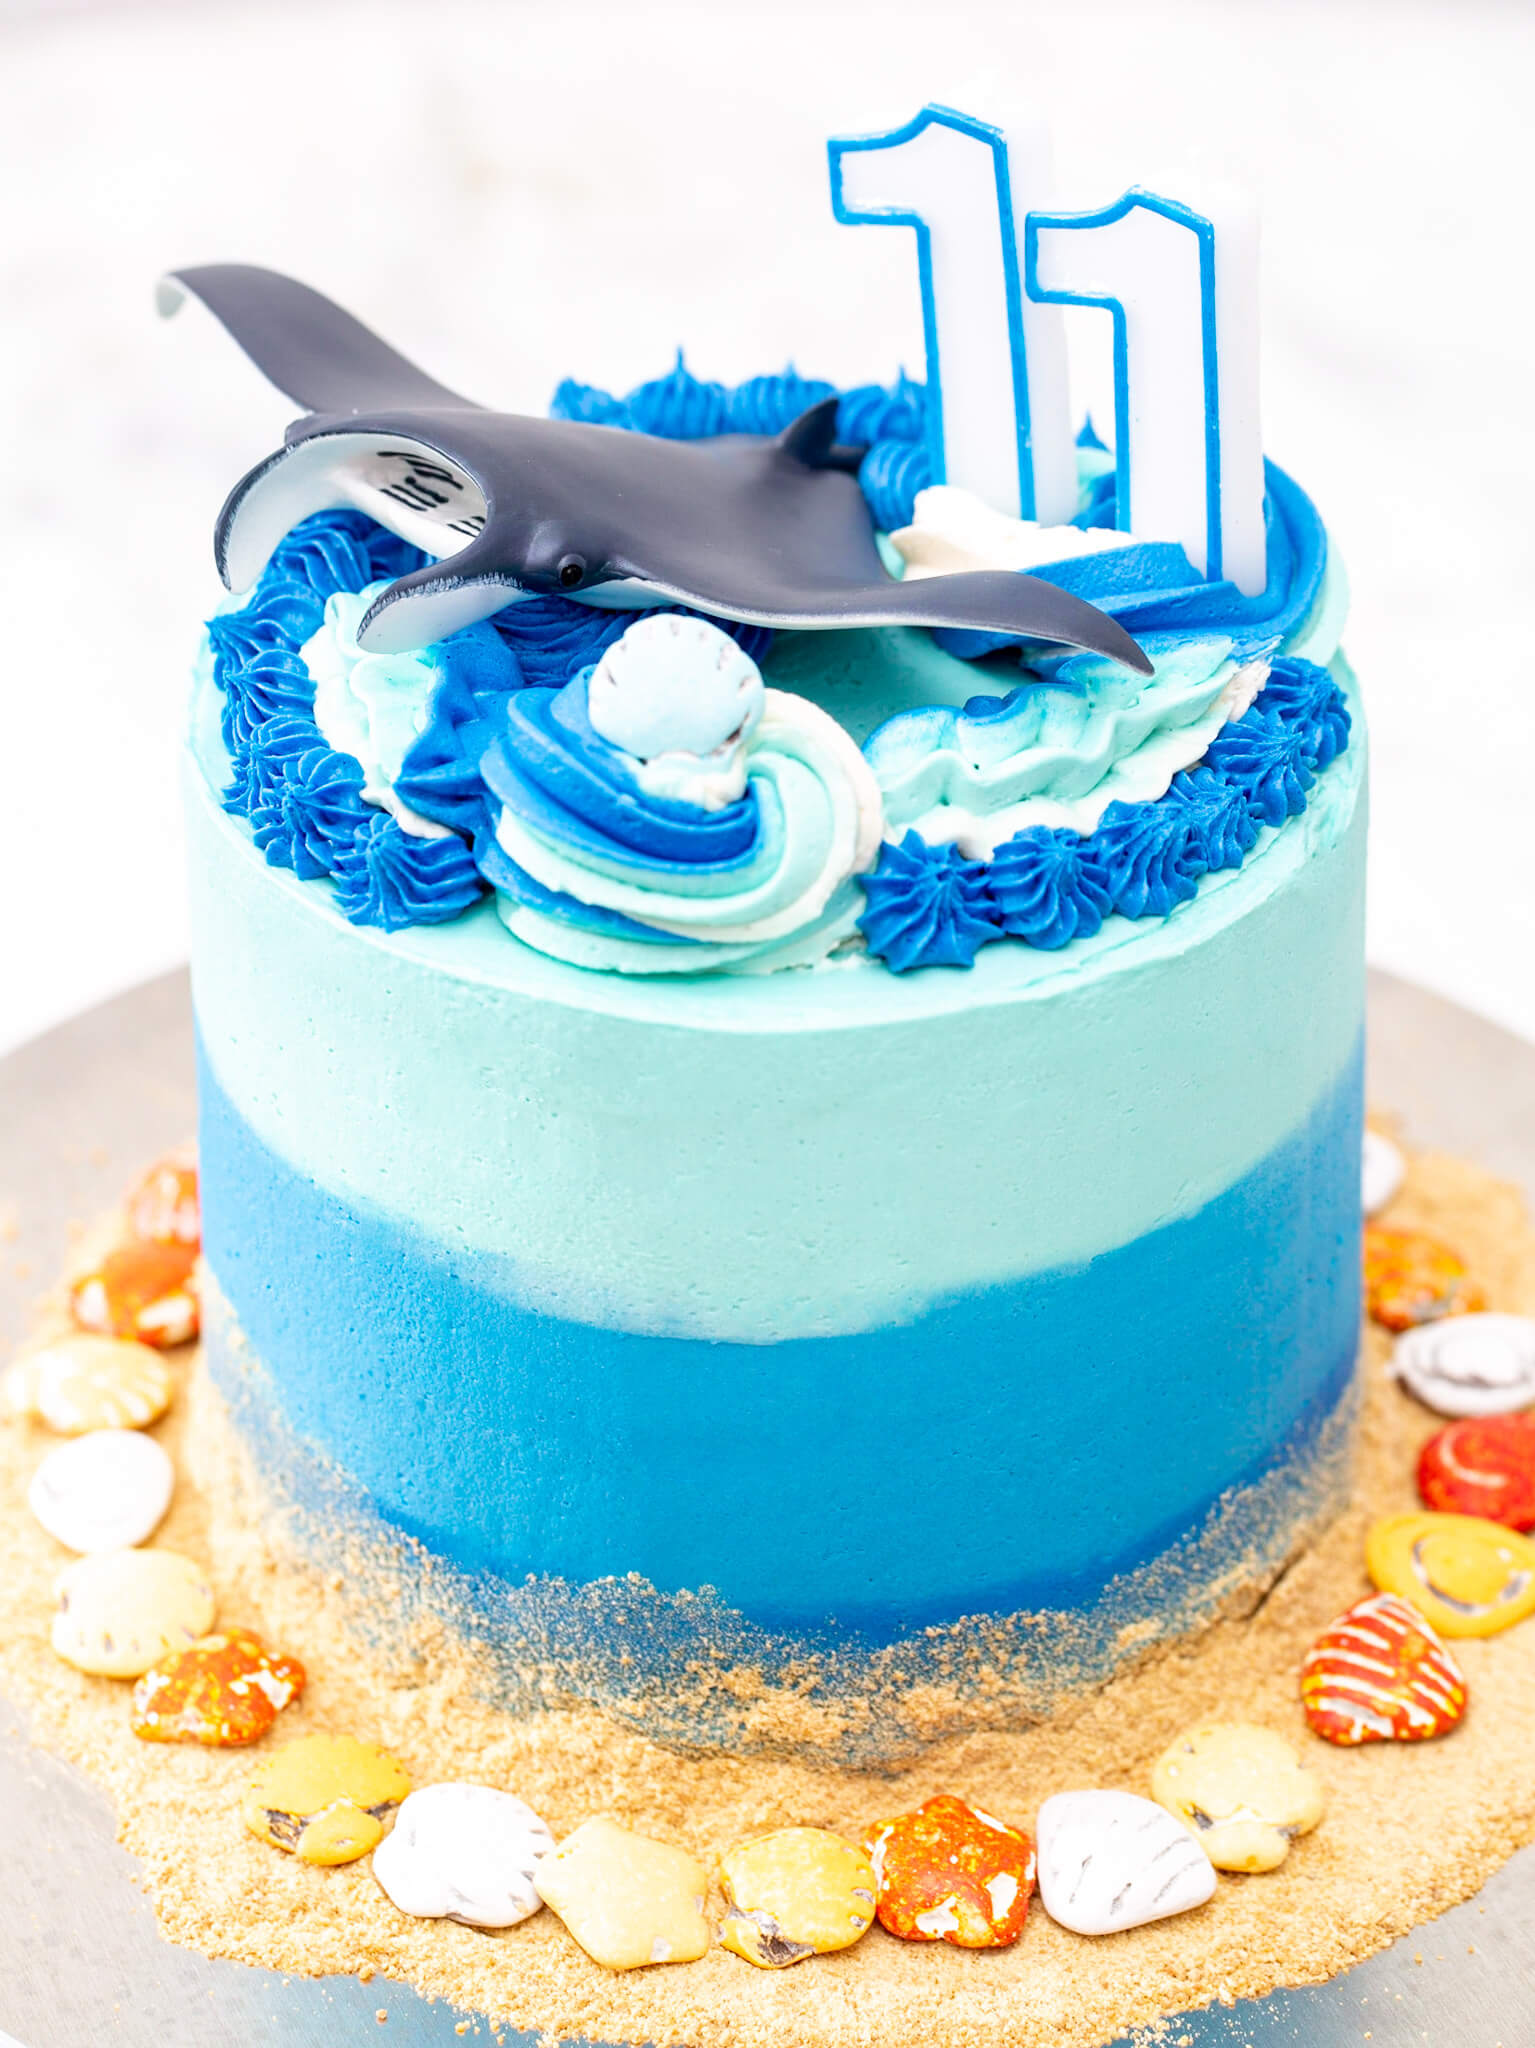 A toy manta on the top of a blue underwater-themed birthday cake